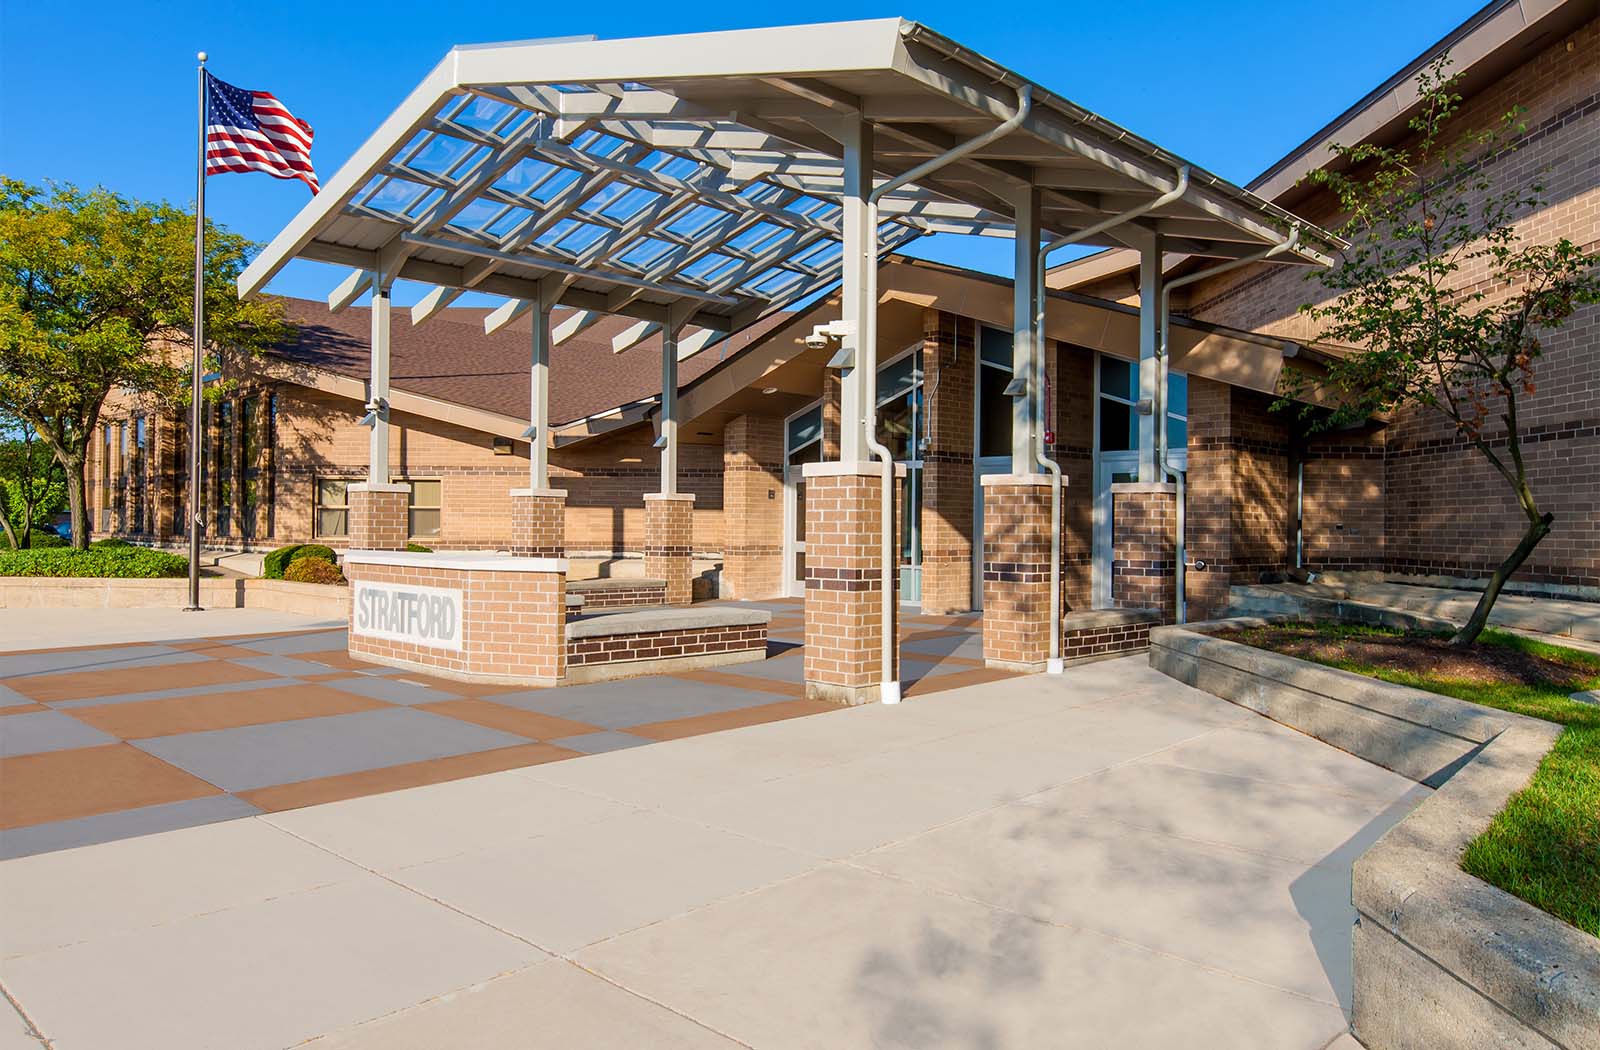 Stratford Middle School-60454a-x-Entrance Canopy-Education